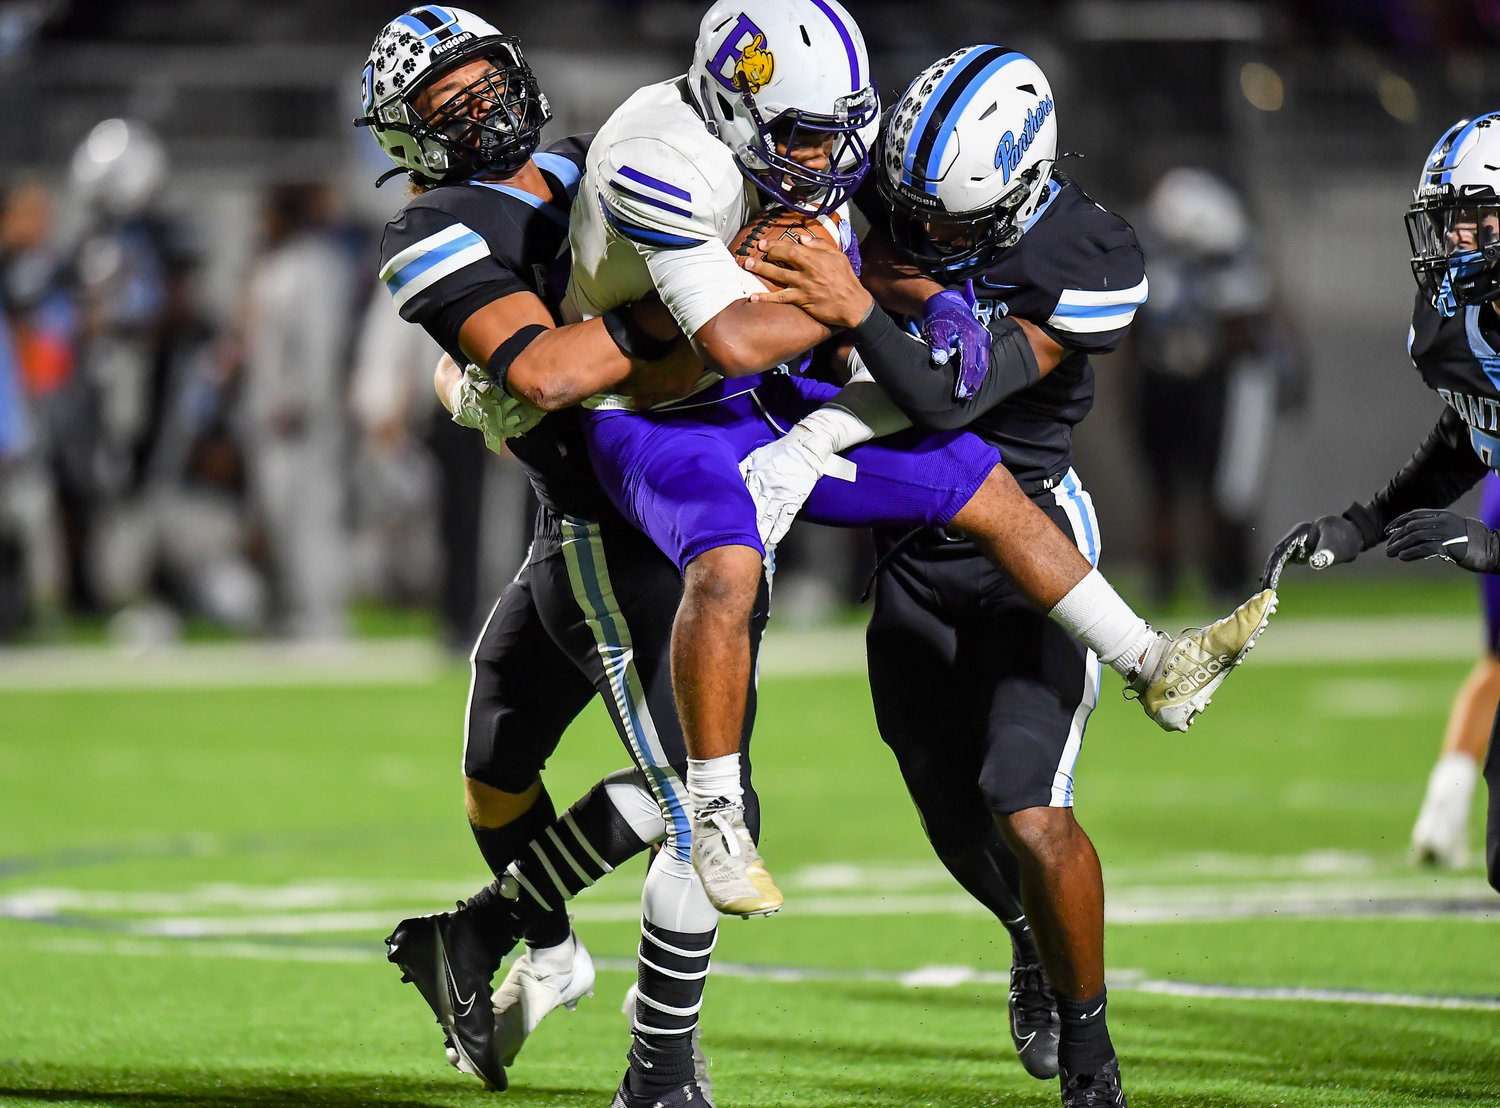 Katy, Tx. Nov 11, 2021: Paetow's defense stops on a Galveston Ball runner during a playoff game between Paetow and Galveston Ball at Legacy Stadium in Katy. (Photo by Mark Goodman / Katy Times)